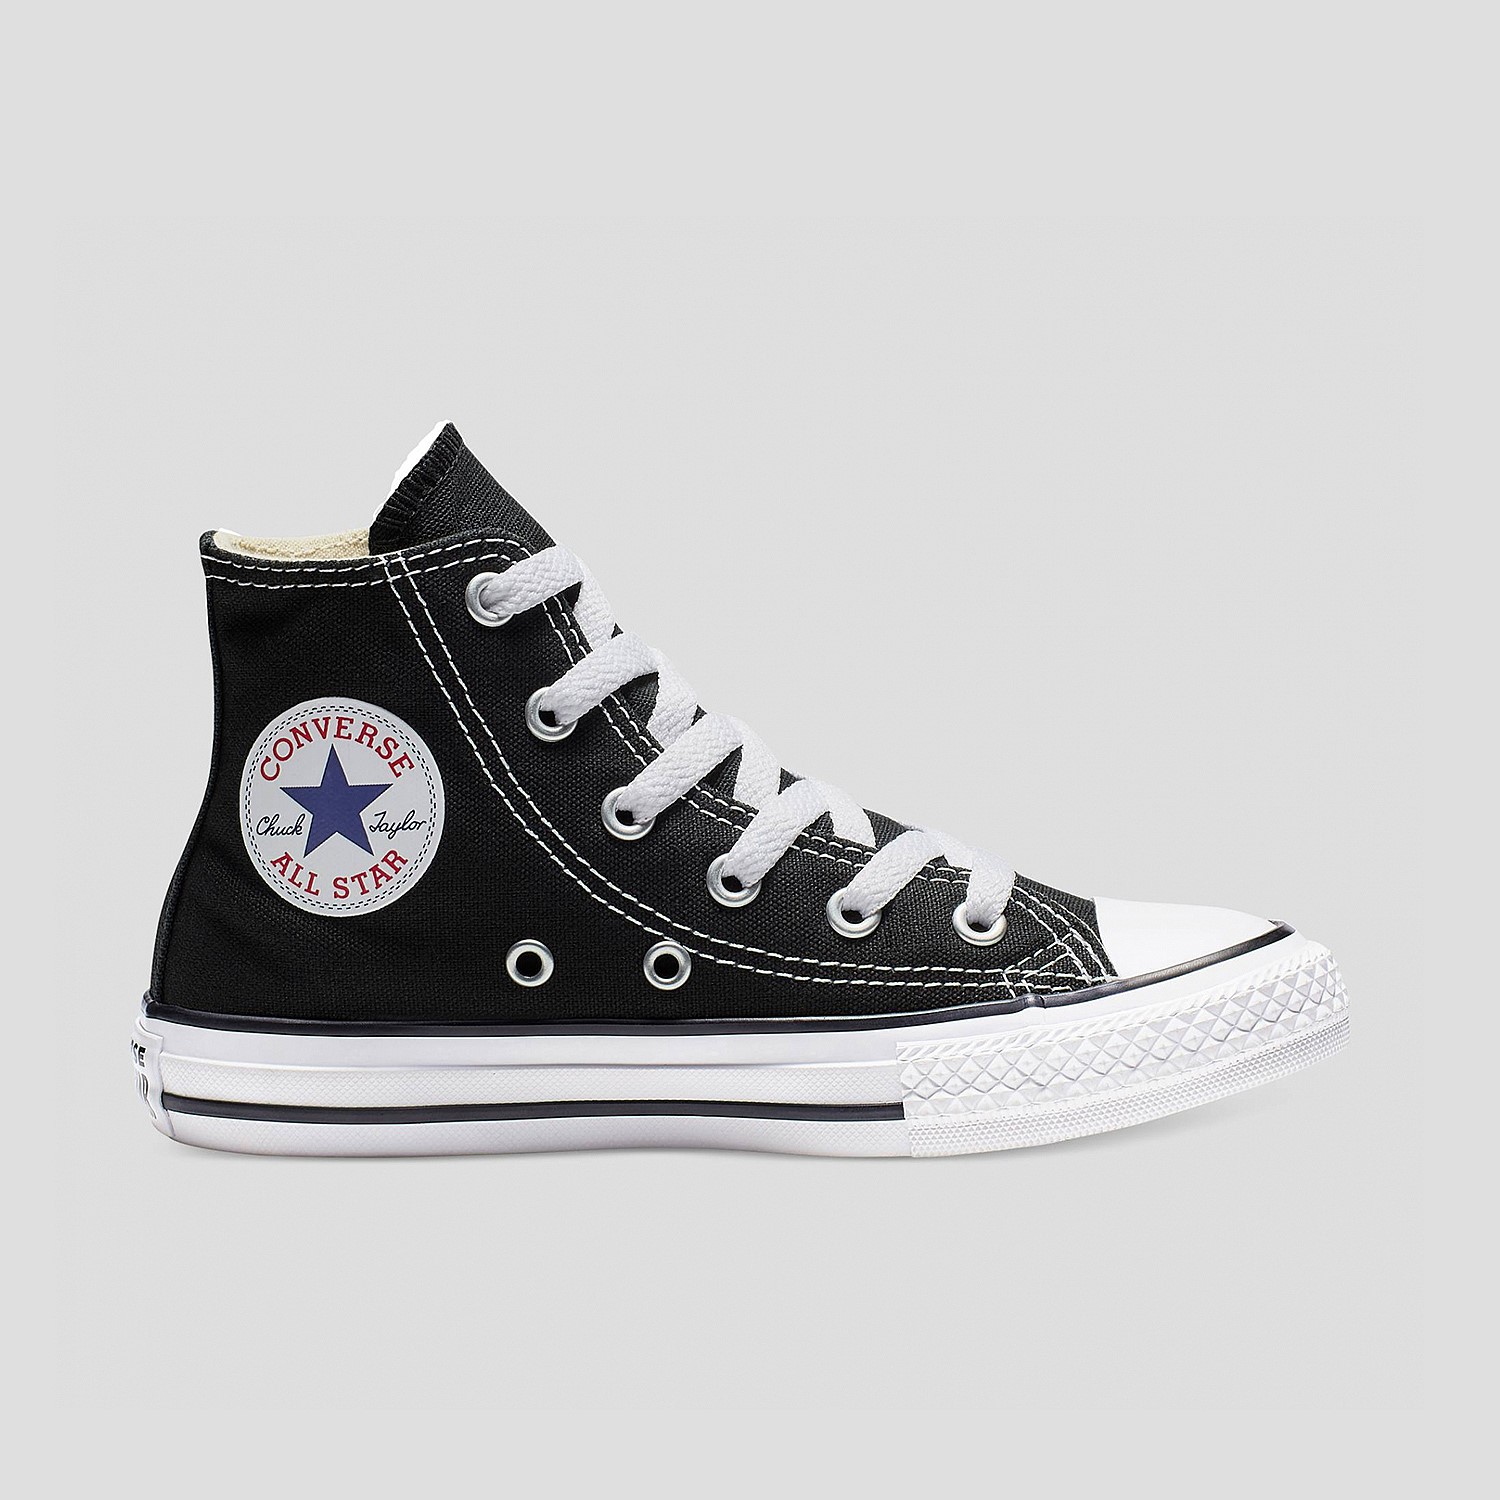 black and white high top converse kids